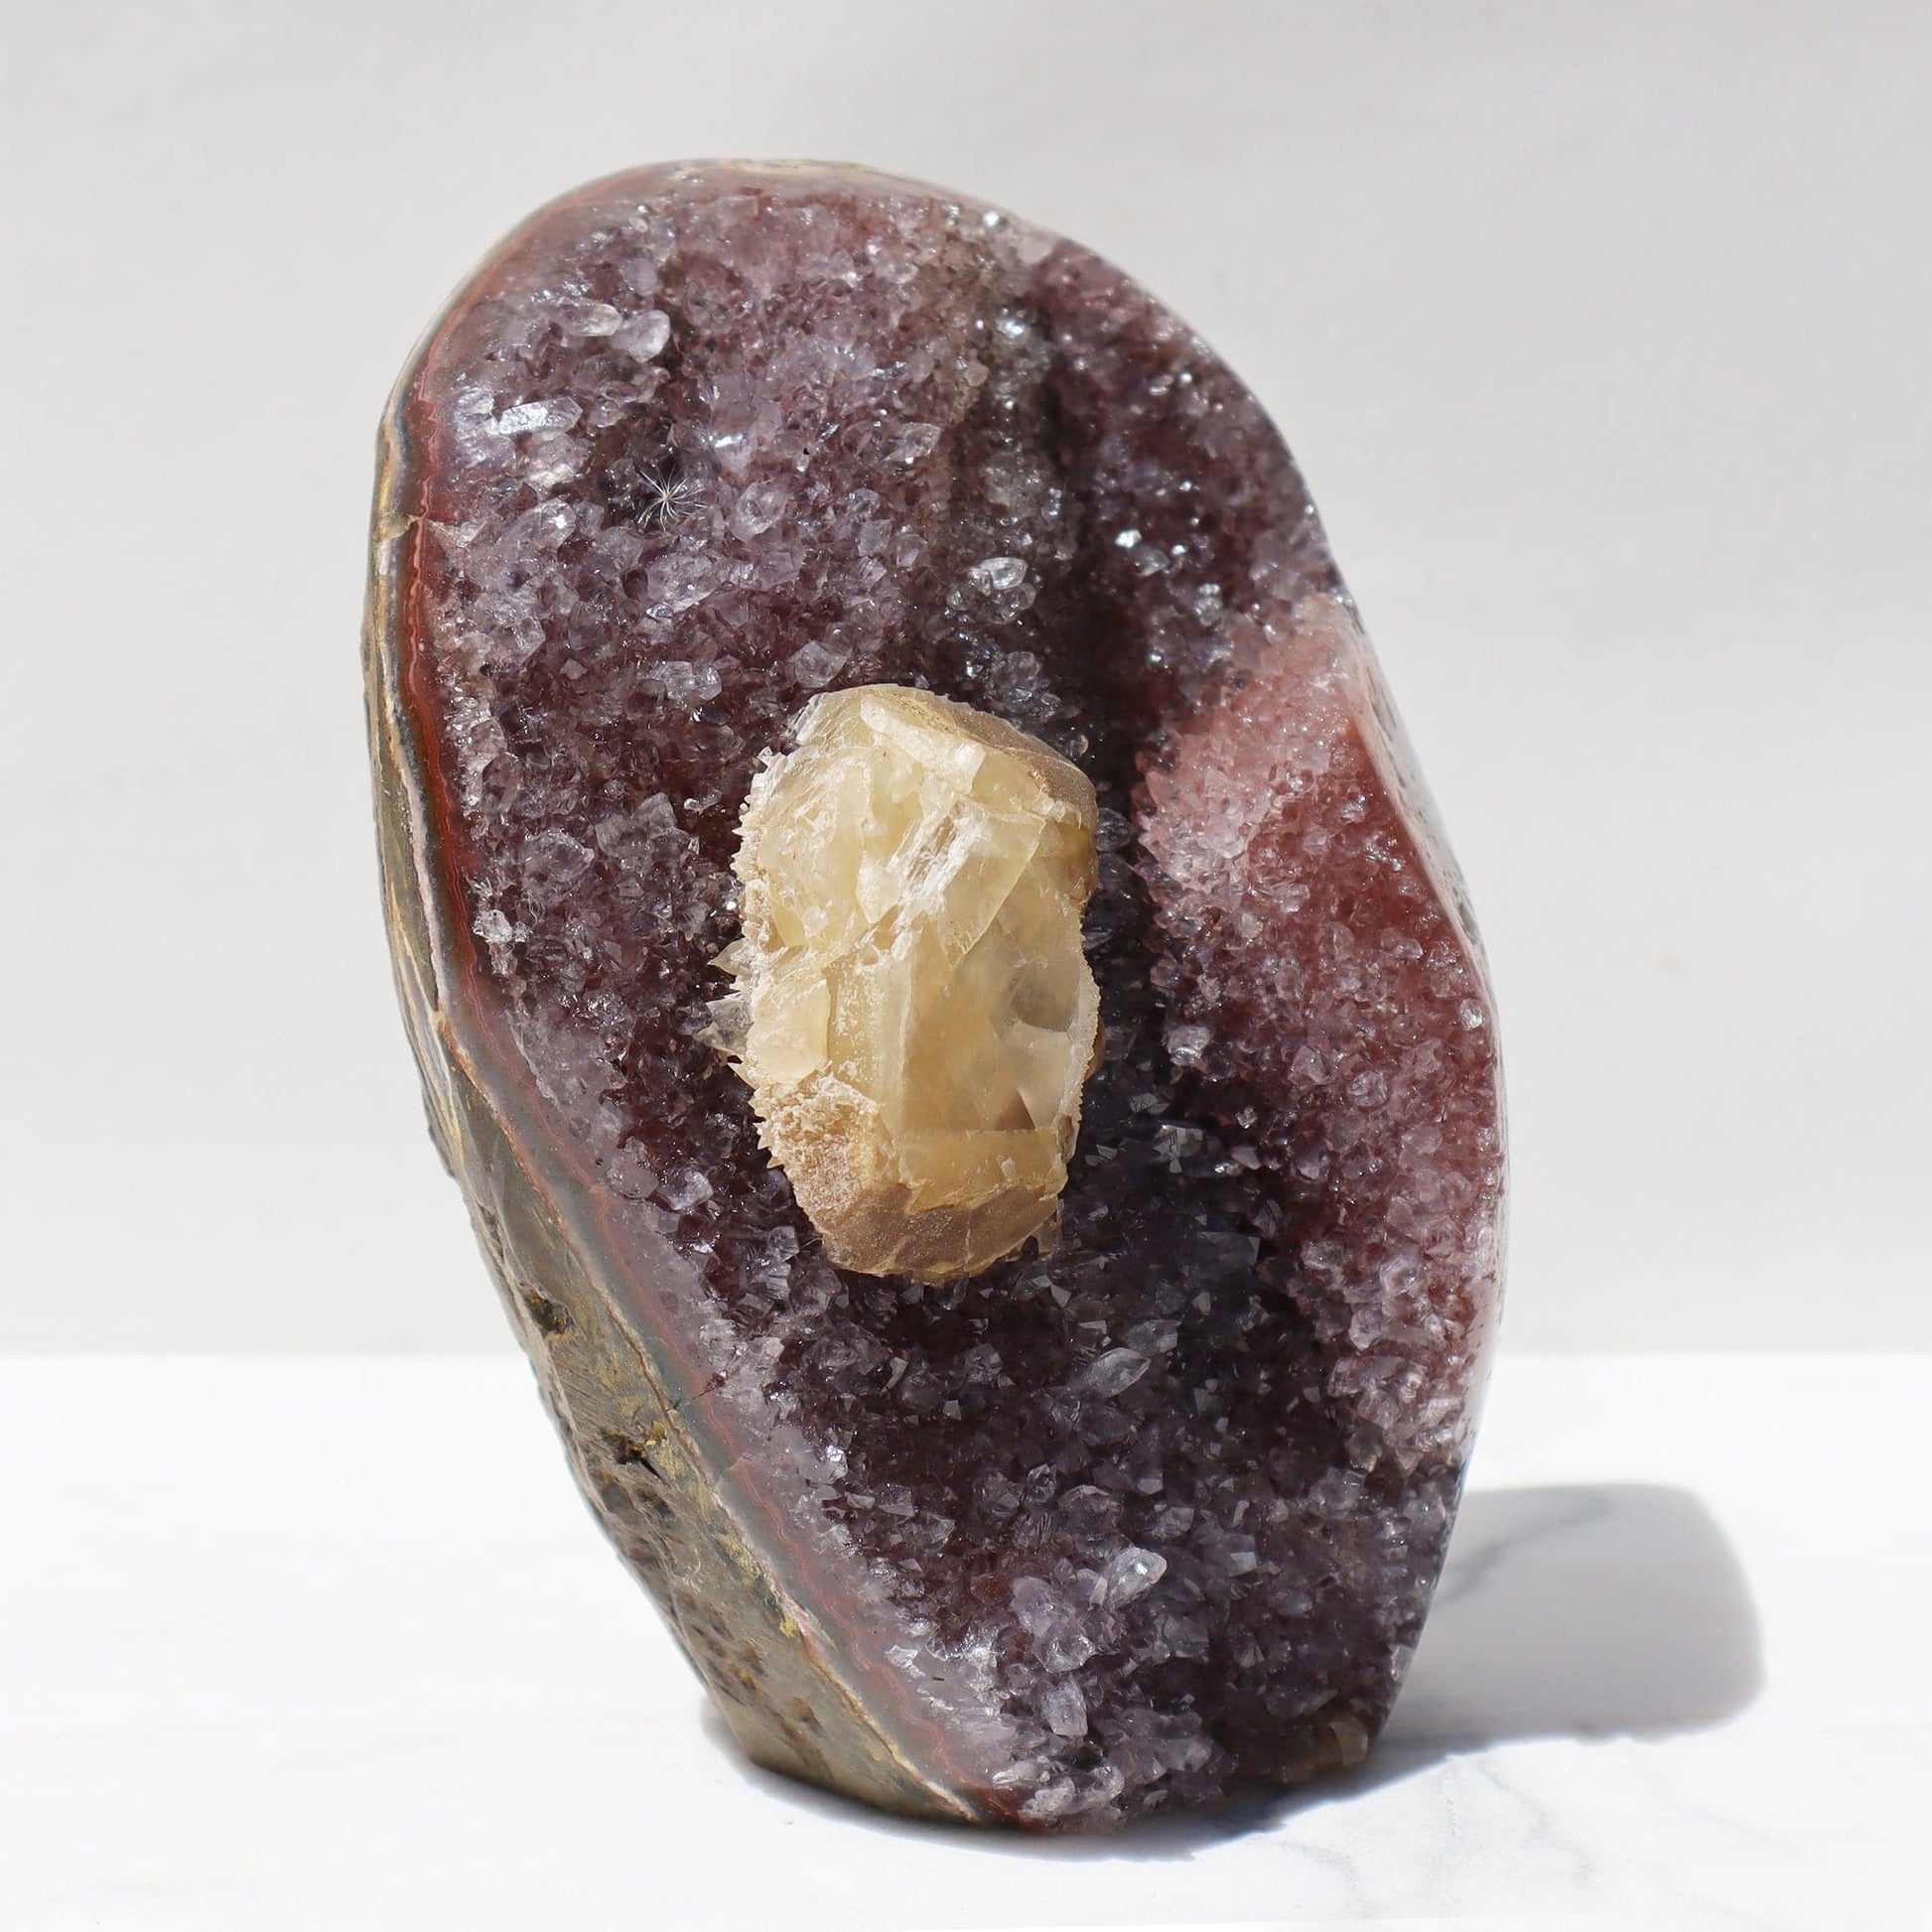 Earth Toned Rare Quartz Geode - Large Yellow Calcite - Deepest Earth